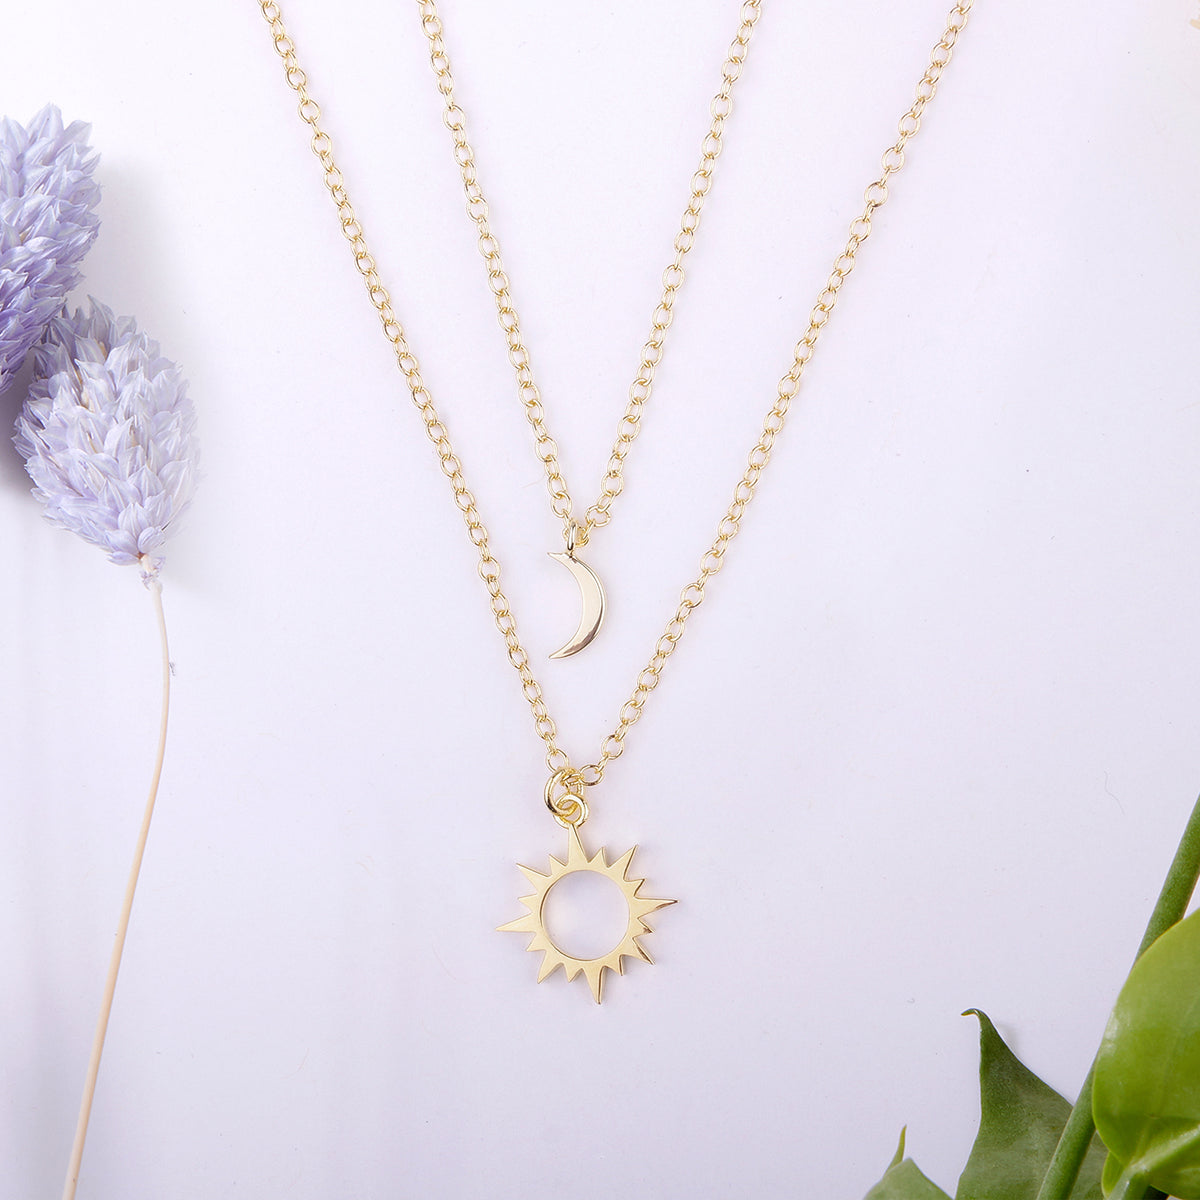 Sun and Moon Celestial Jewelry Necklace Set